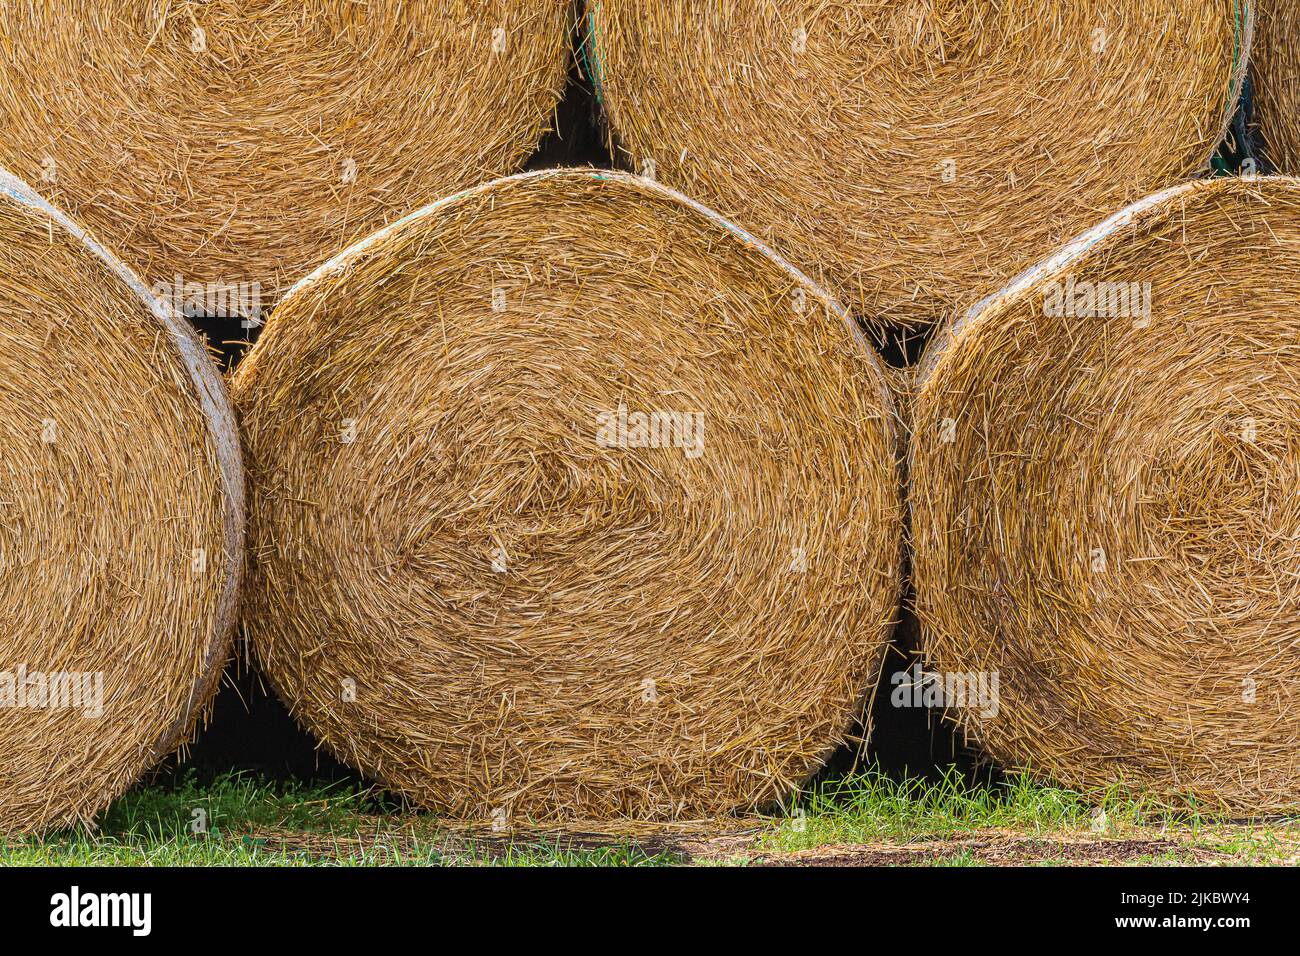 Hay bales at the edge of the field after harvest. Straw and hay pressed into straw bales. hay bales next to each other. Structures of dry golden brown Stock Photo